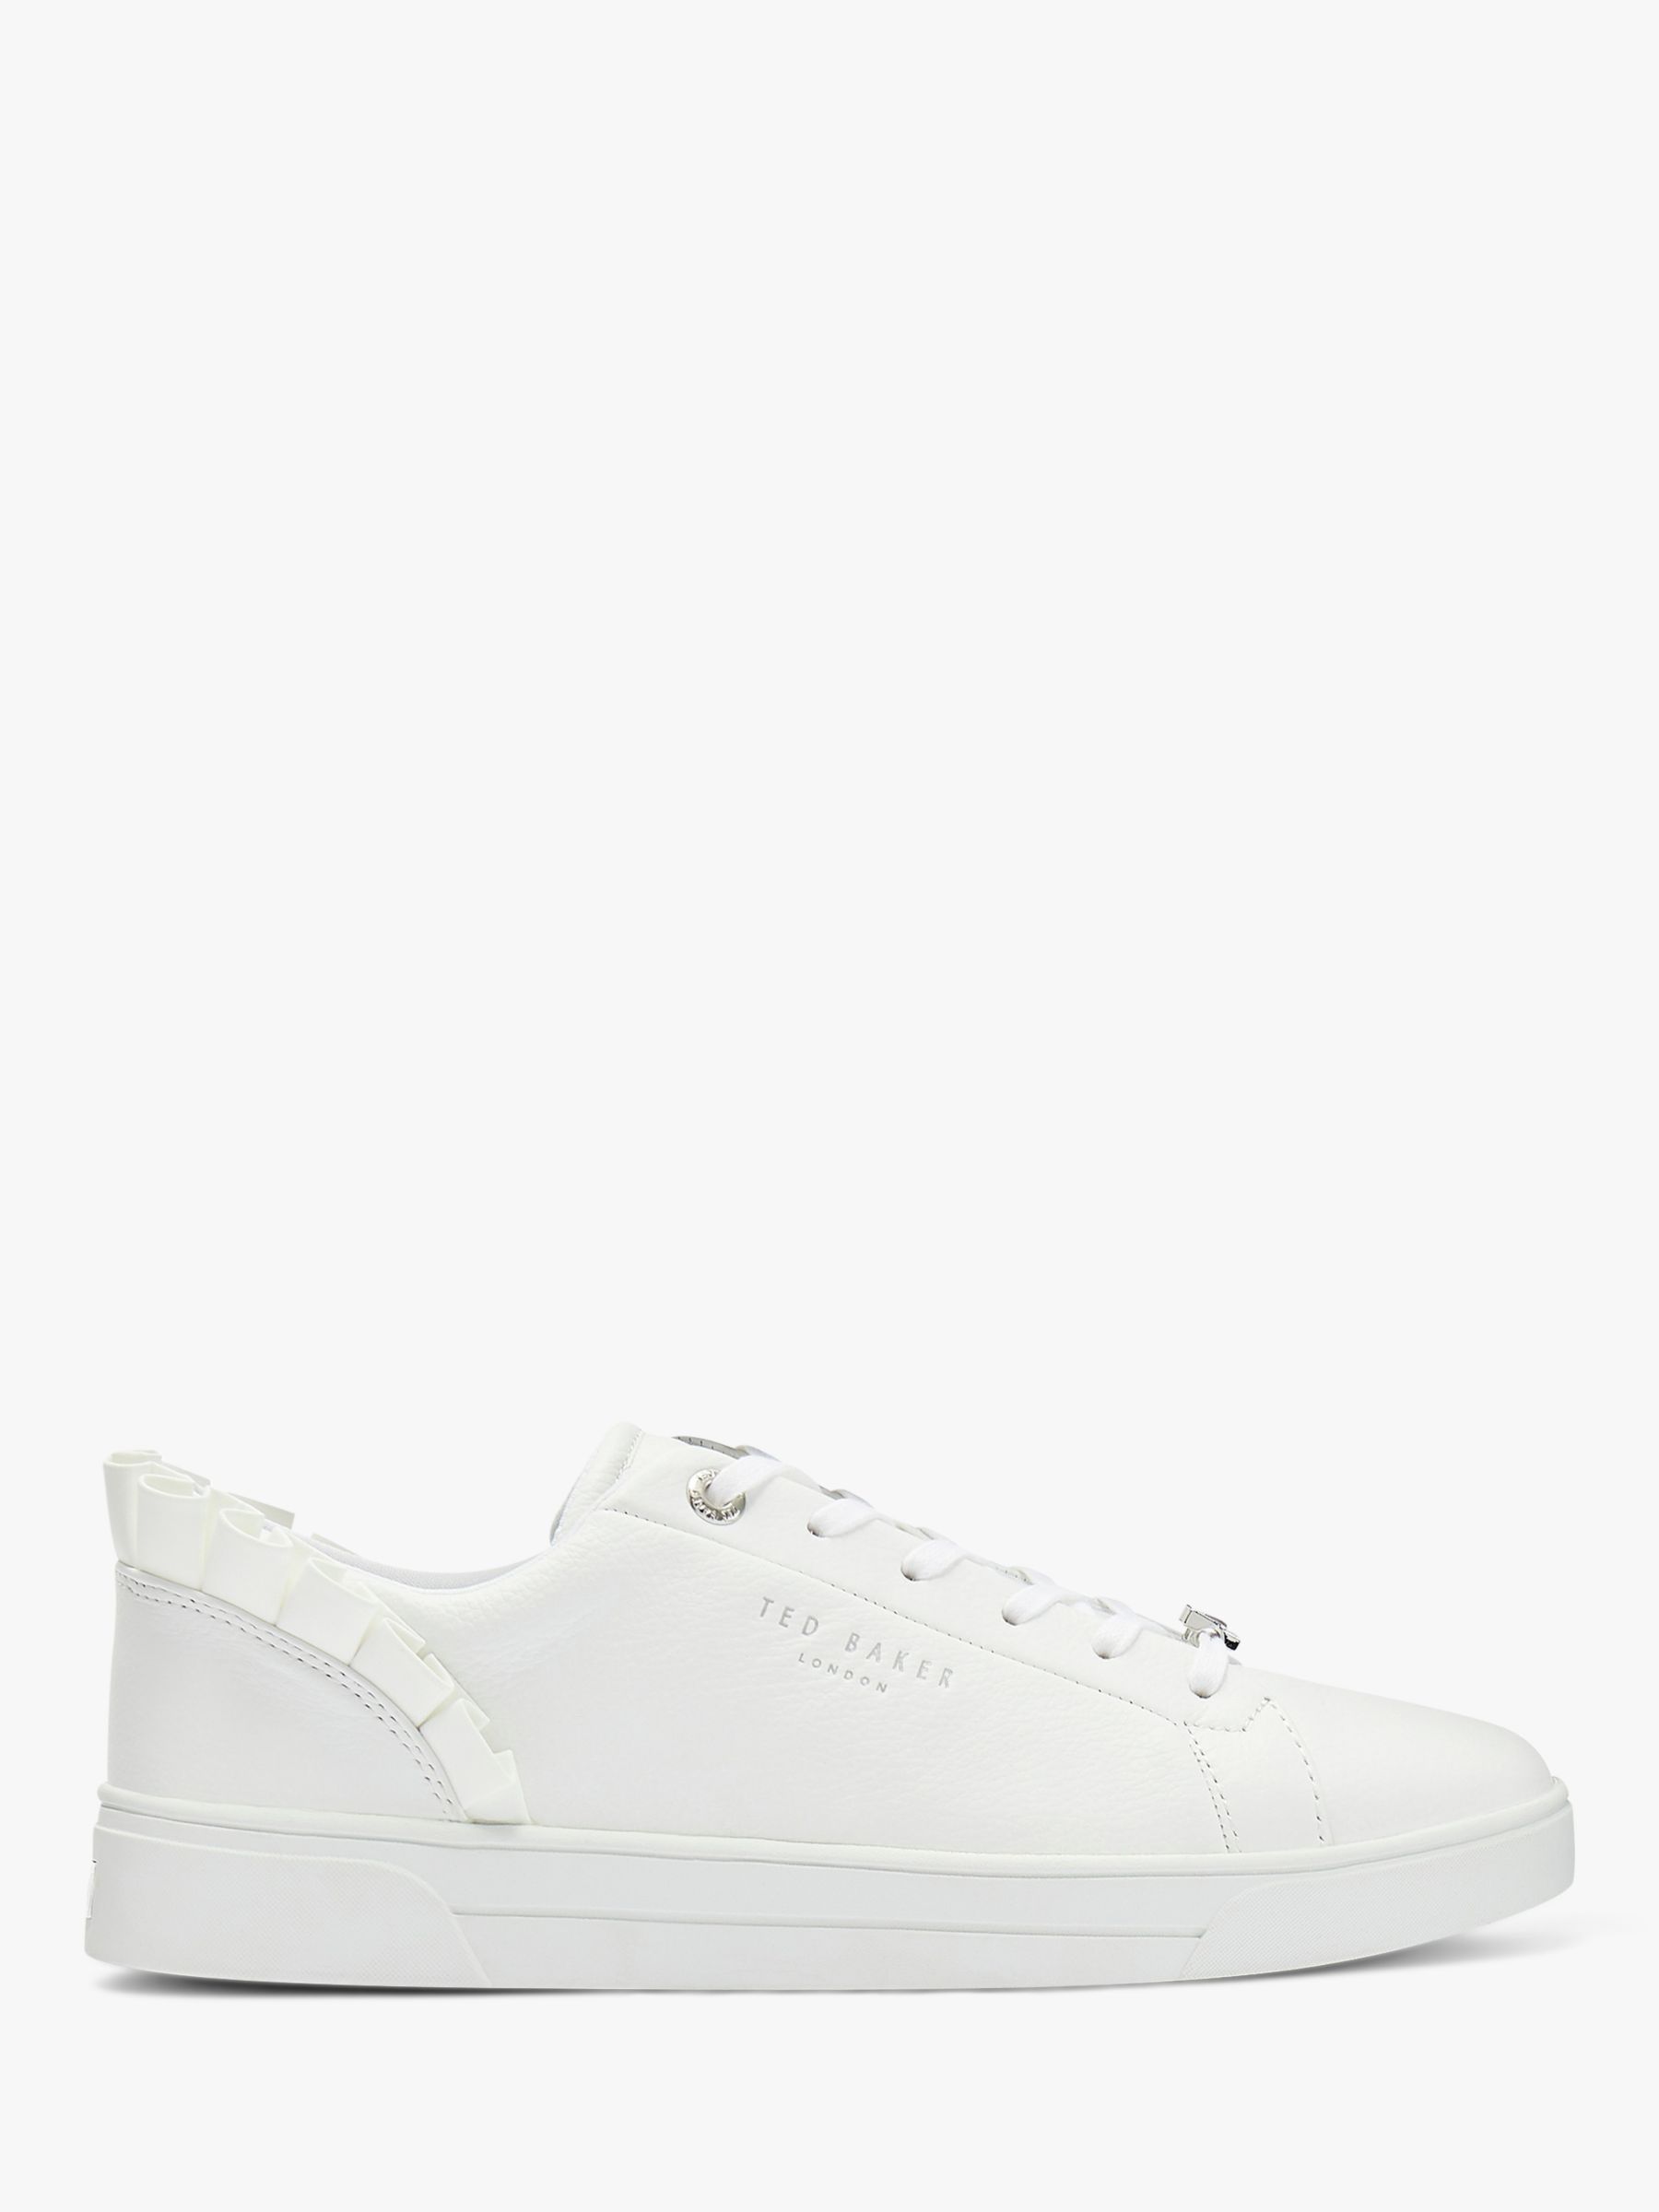 Ted Baker Astrina Leather Ruffle Trim Trainers, White